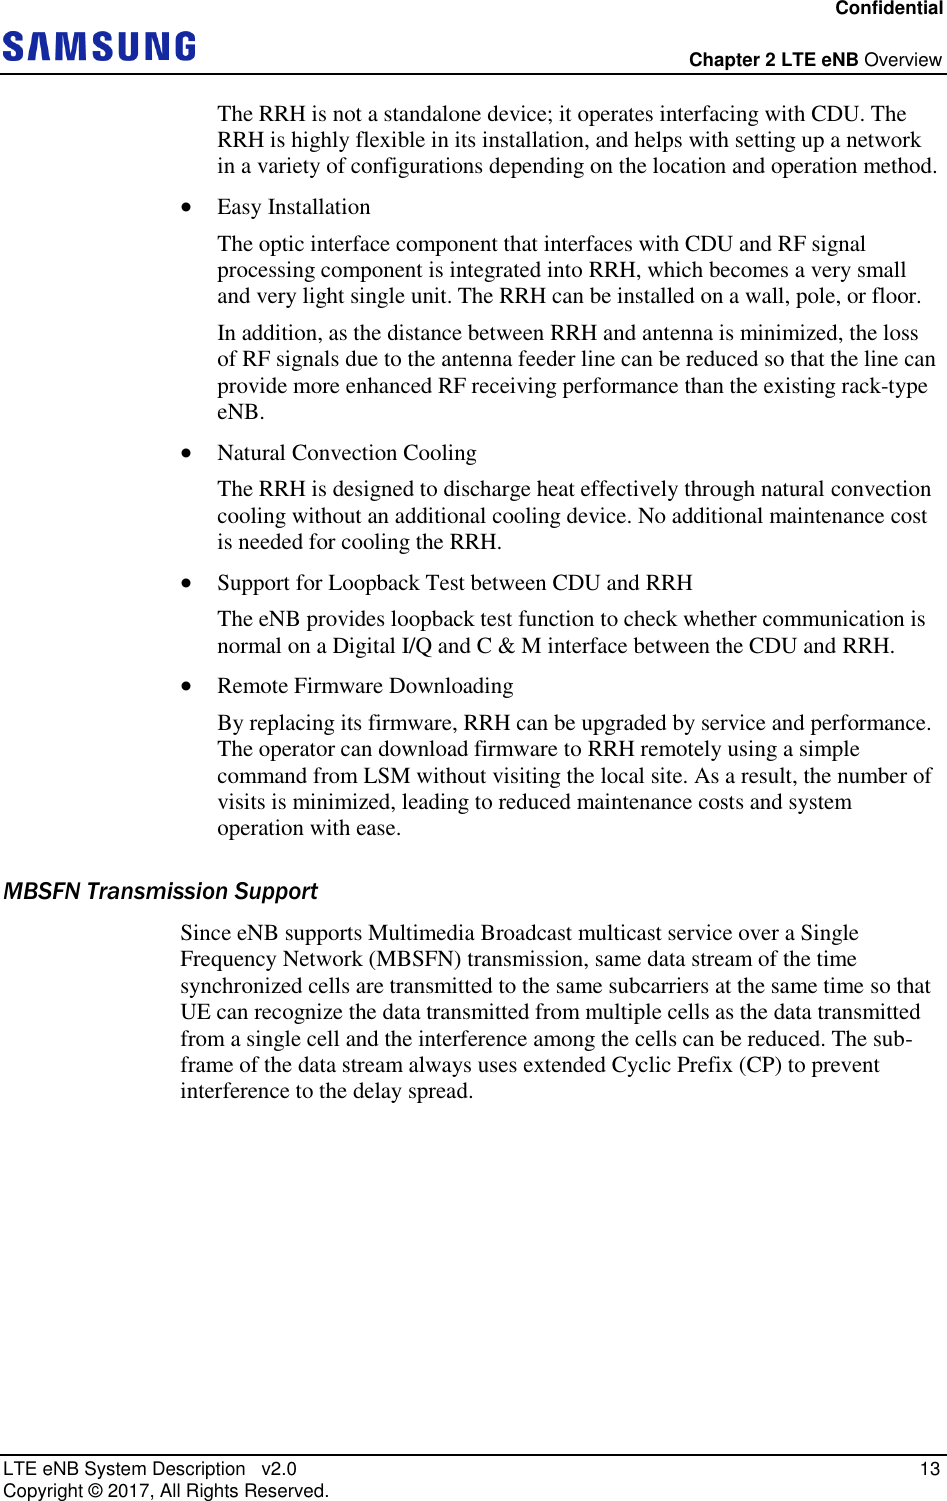 Confidential  Chapter 2 LTE eNB Overview LTE eNB System Description   v2.0   13 Copyright ©  2017, All Rights Reserved. The RRH is not a standalone device; it operates interfacing with CDU. The RRH is highly flexible in its installation, and helps with setting up a network in a variety of configurations depending on the location and operation method.  Easy Installation The optic interface component that interfaces with CDU and RF signal processing component is integrated into RRH, which becomes a very small and very light single unit. The RRH can be installed on a wall, pole, or floor. In addition, as the distance between RRH and antenna is minimized, the loss of RF signals due to the antenna feeder line can be reduced so that the line can provide more enhanced RF receiving performance than the existing rack-type eNB.  Natural Convection Cooling The RRH is designed to discharge heat effectively through natural convection cooling without an additional cooling device. No additional maintenance cost is needed for cooling the RRH.  Support for Loopback Test between CDU and RRH The eNB provides loopback test function to check whether communication is normal on a Digital I/Q and C &amp; M interface between the CDU and RRH.  Remote Firmware Downloading By replacing its firmware, RRH can be upgraded by service and performance. The operator can download firmware to RRH remotely using a simple command from LSM without visiting the local site. As a result, the number of visits is minimized, leading to reduced maintenance costs and system operation with ease. MBSFN Transmission Support Since eNB supports Multimedia Broadcast multicast service over a Single Frequency Network (MBSFN) transmission, same data stream of the time synchronized cells are transmitted to the same subcarriers at the same time so that UE can recognize the data transmitted from multiple cells as the data transmitted from a single cell and the interference among the cells can be reduced. The sub-frame of the data stream always uses extended Cyclic Prefix (CP) to prevent interference to the delay spread.    